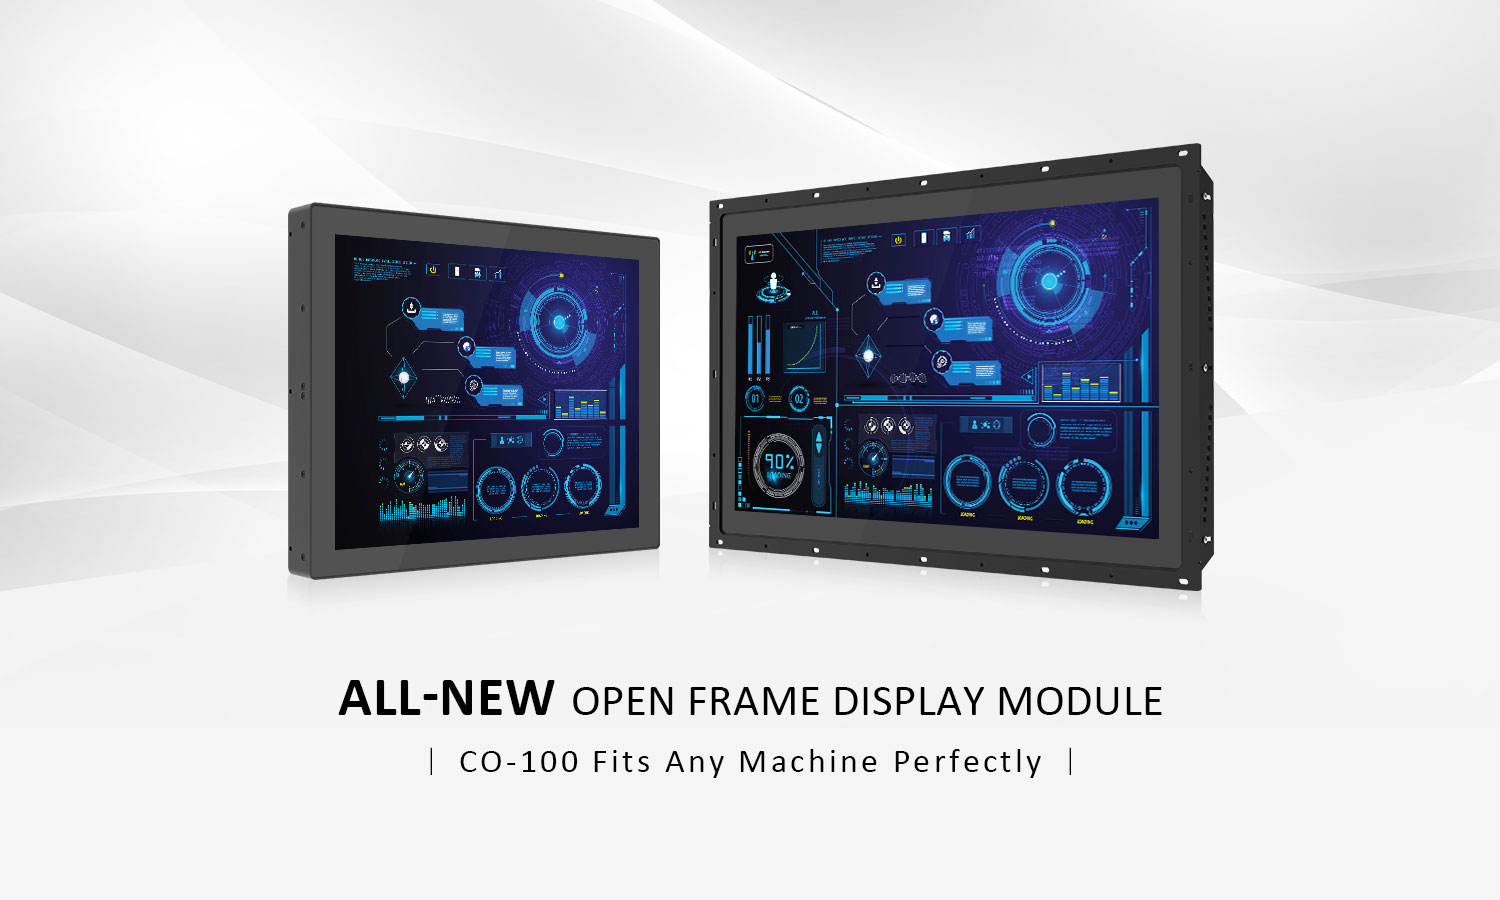 All new open frame - CO-100 fits any machine perfectly